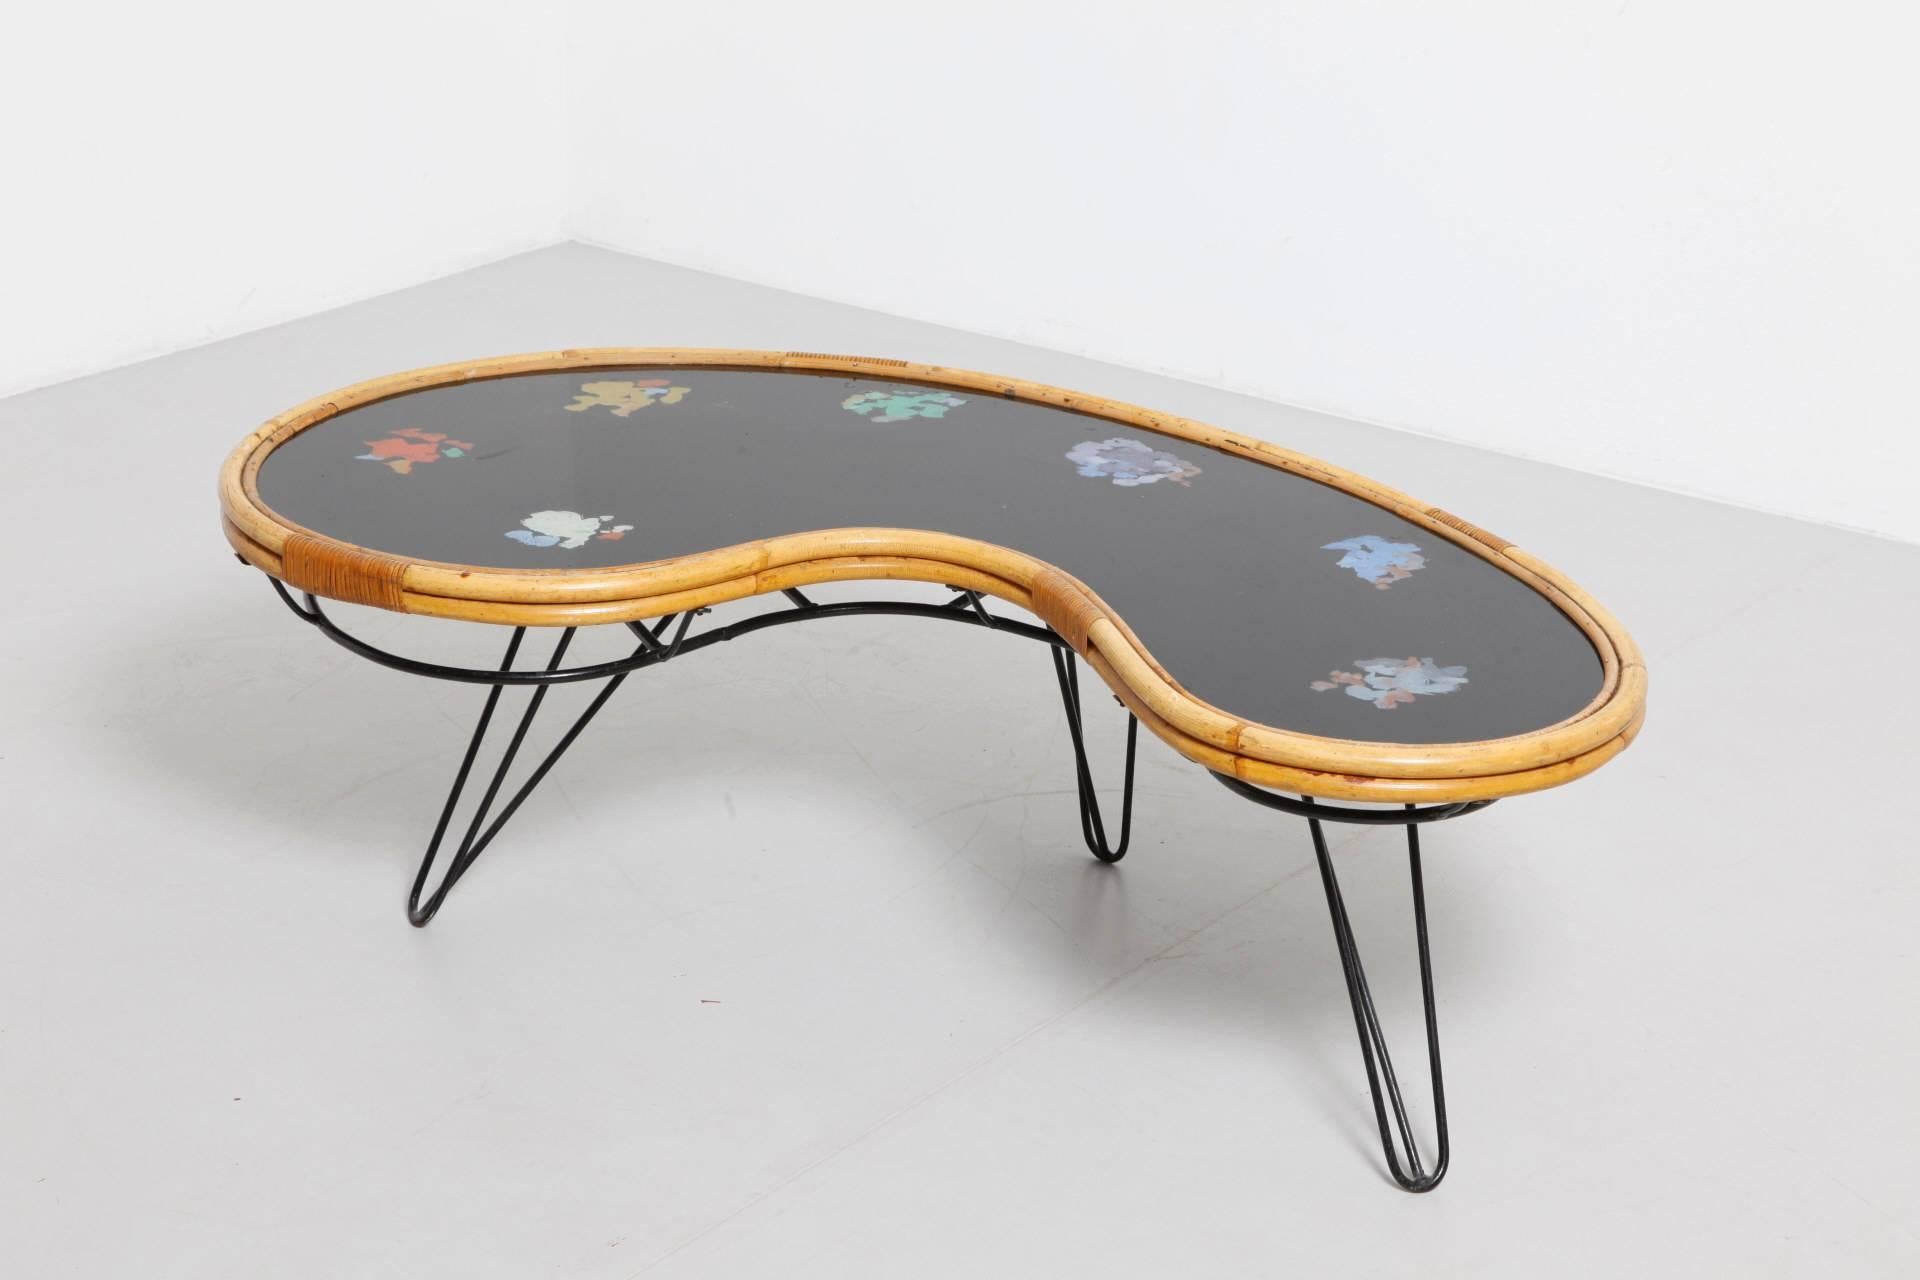 Whimsical original 1950s bamboo kidney-bone designed coffee table.

 The hairpin legs are made from stainless steel bar, with a glass top decorated as a painters-pallet.
Original unique piece from the 1950s.